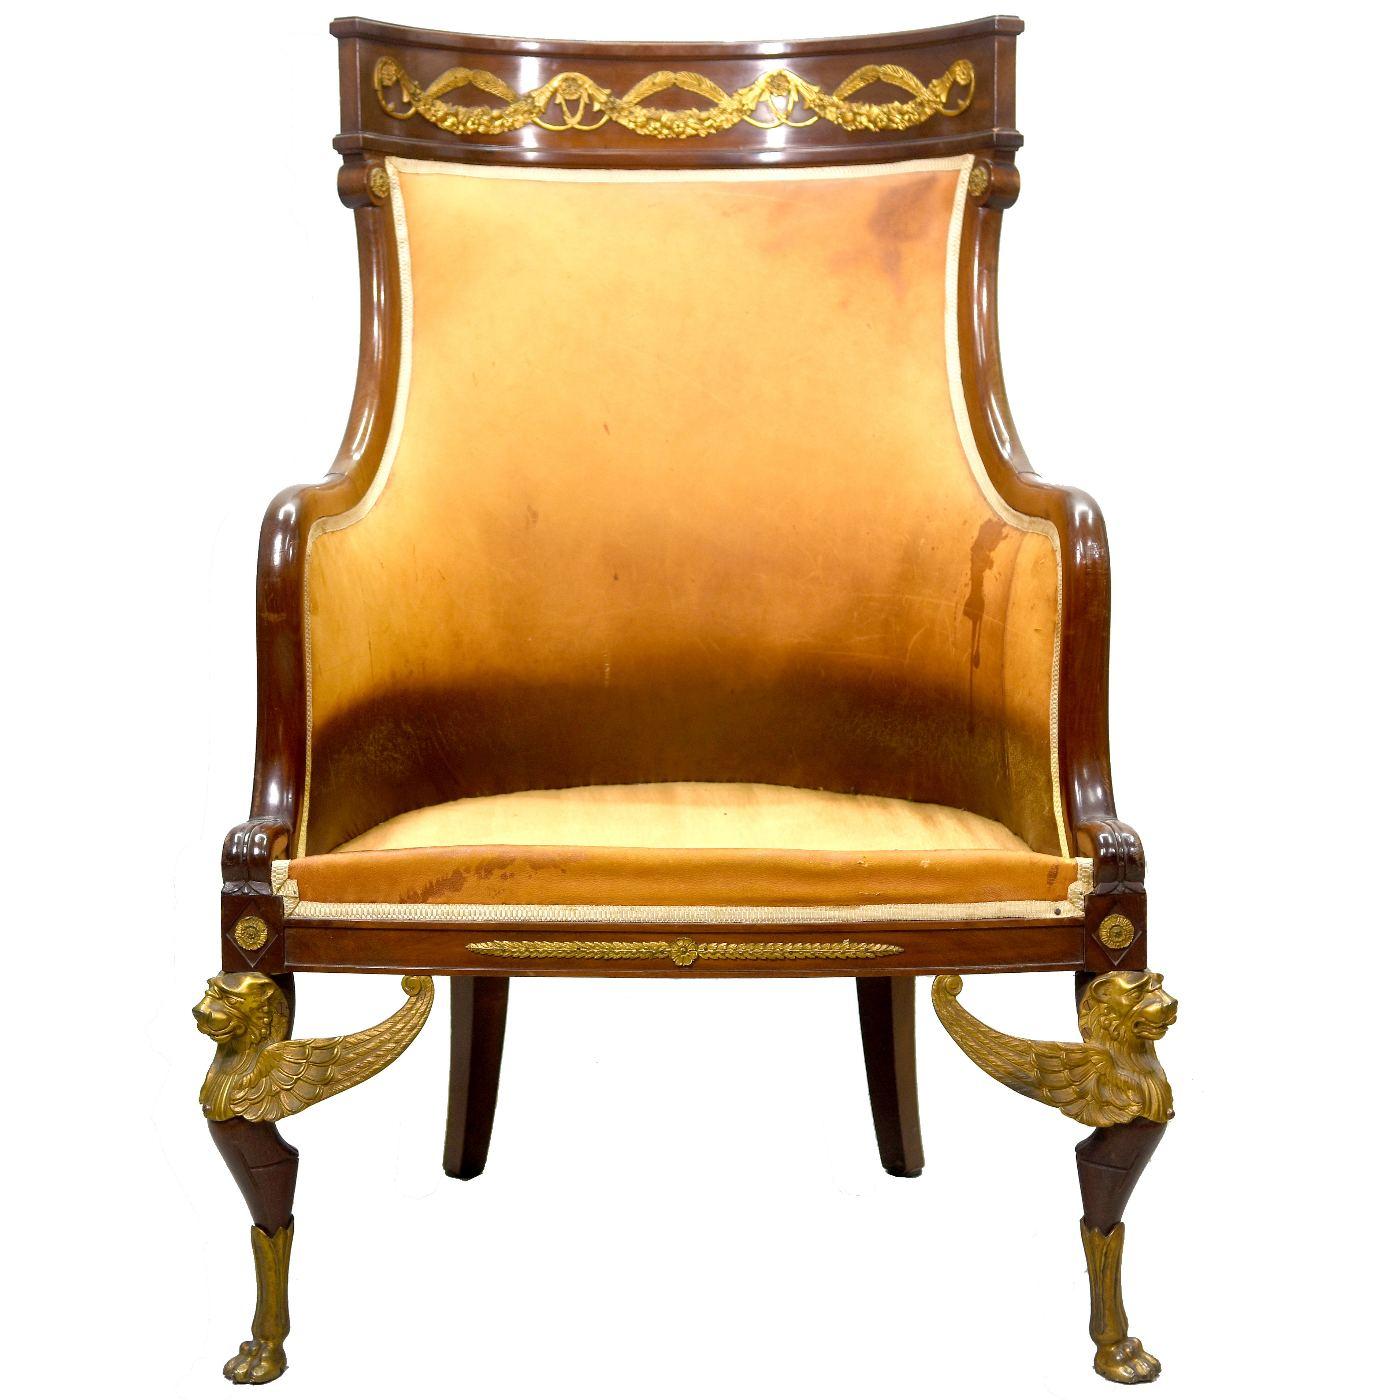 Empire desk chair in rich mahogany gilt bronze register decorated with griffins and flower garlands from the 1880 period, dimension height 106 cm for a width of 76 cm and a depth of 50 cm. Note that the leather is damaged (tears and stains) This